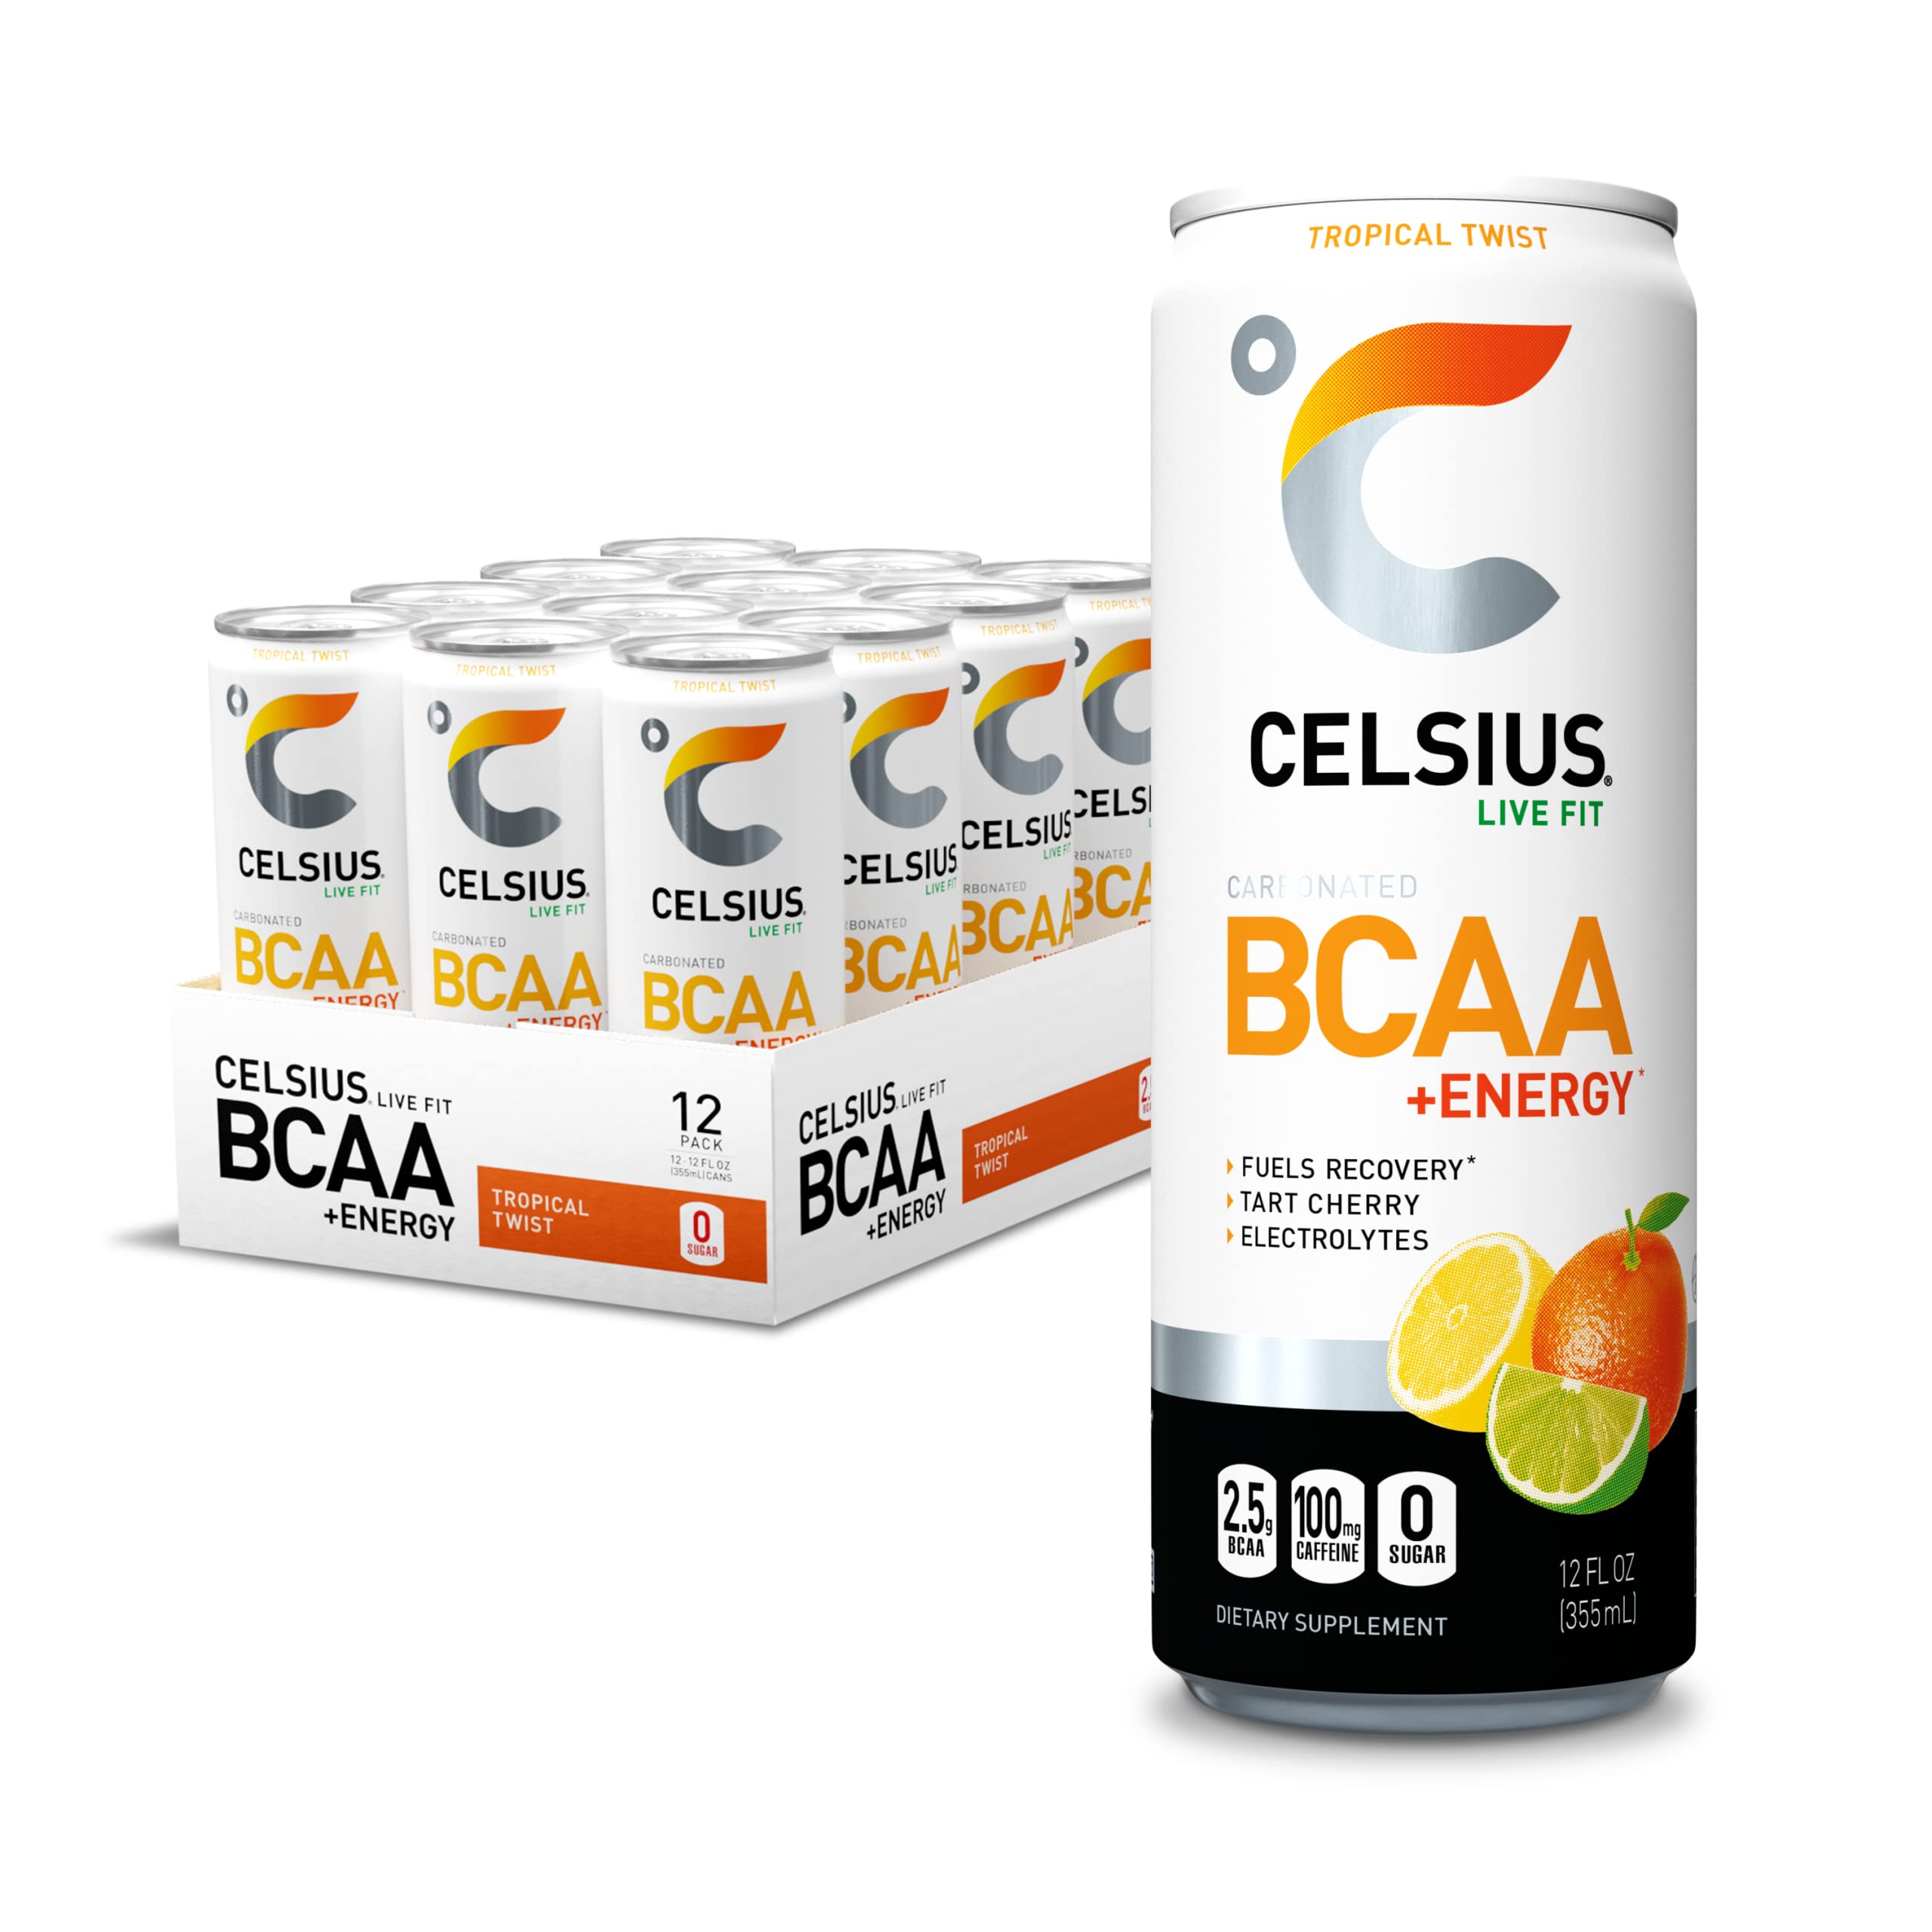 CELSIUS BCAA +Energy Sparkling Post-Workout Recovery & Hydration Drink, Tropical Twist, 144 Fl Oz (Pack of 12)